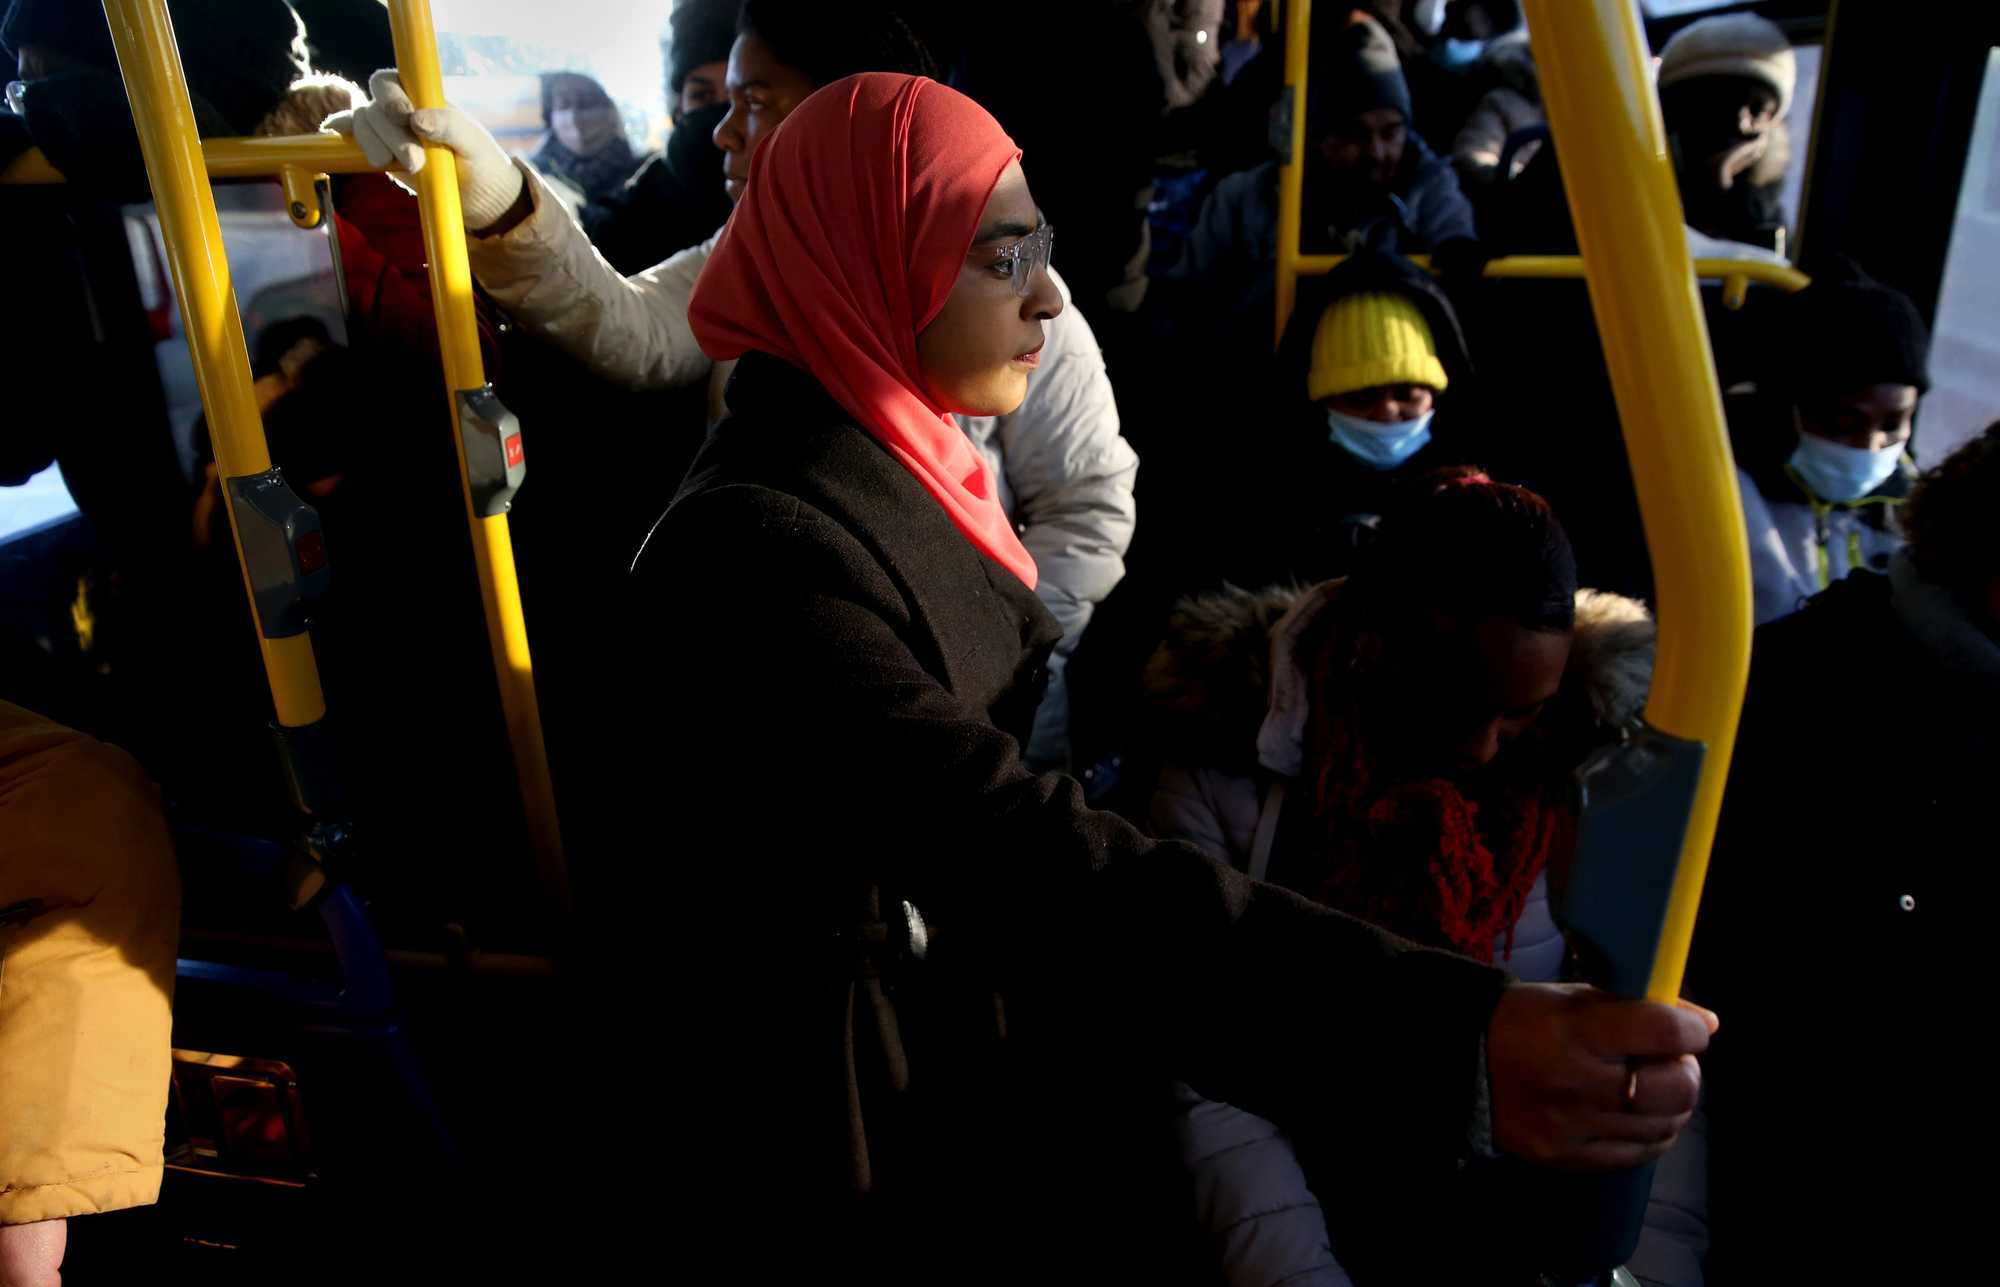 Najla Habib lives in Roxbury and commutes by bus and two trains to get to her job in Kendall Square in Cambridge.